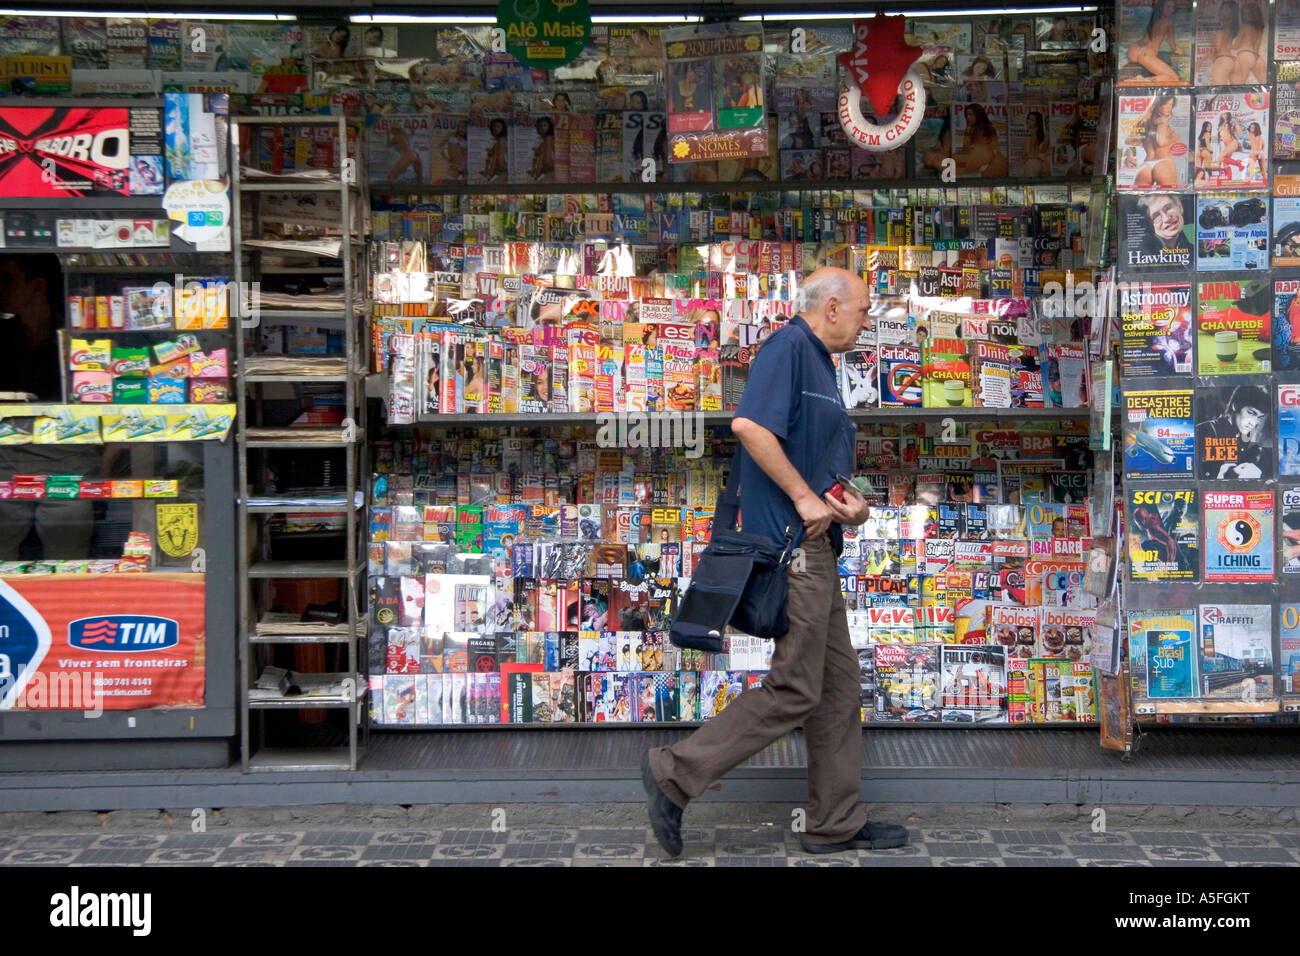 A man walks past a newsstand in the Liberdade asian section of Sao Paulo Brazil Stock Photo